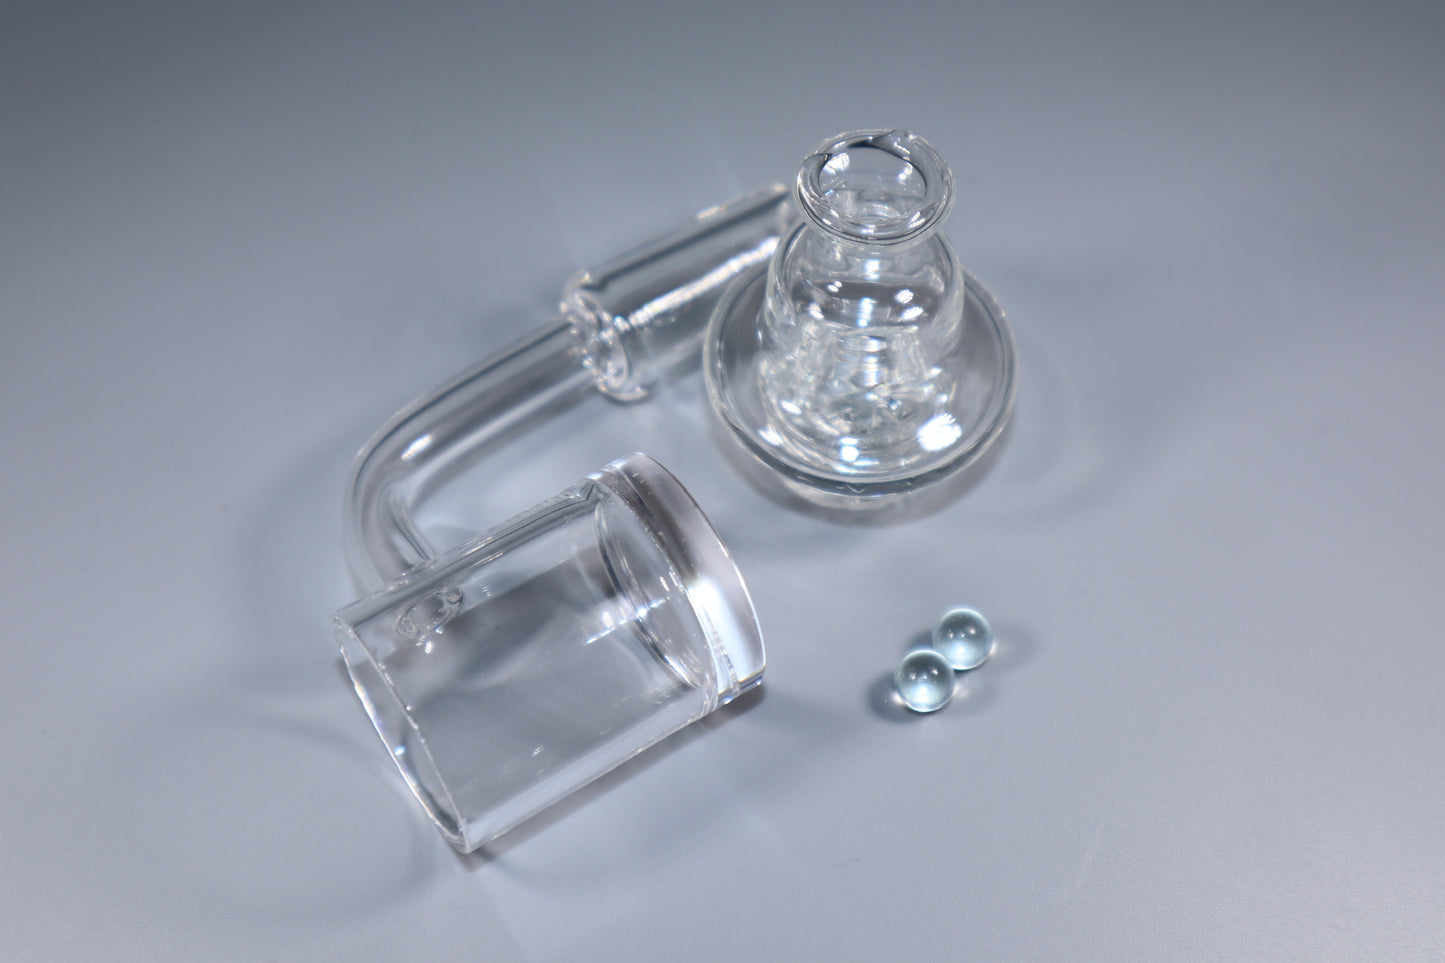 14MM Banger Nail with 2 Terp Pearls & Carb Cover